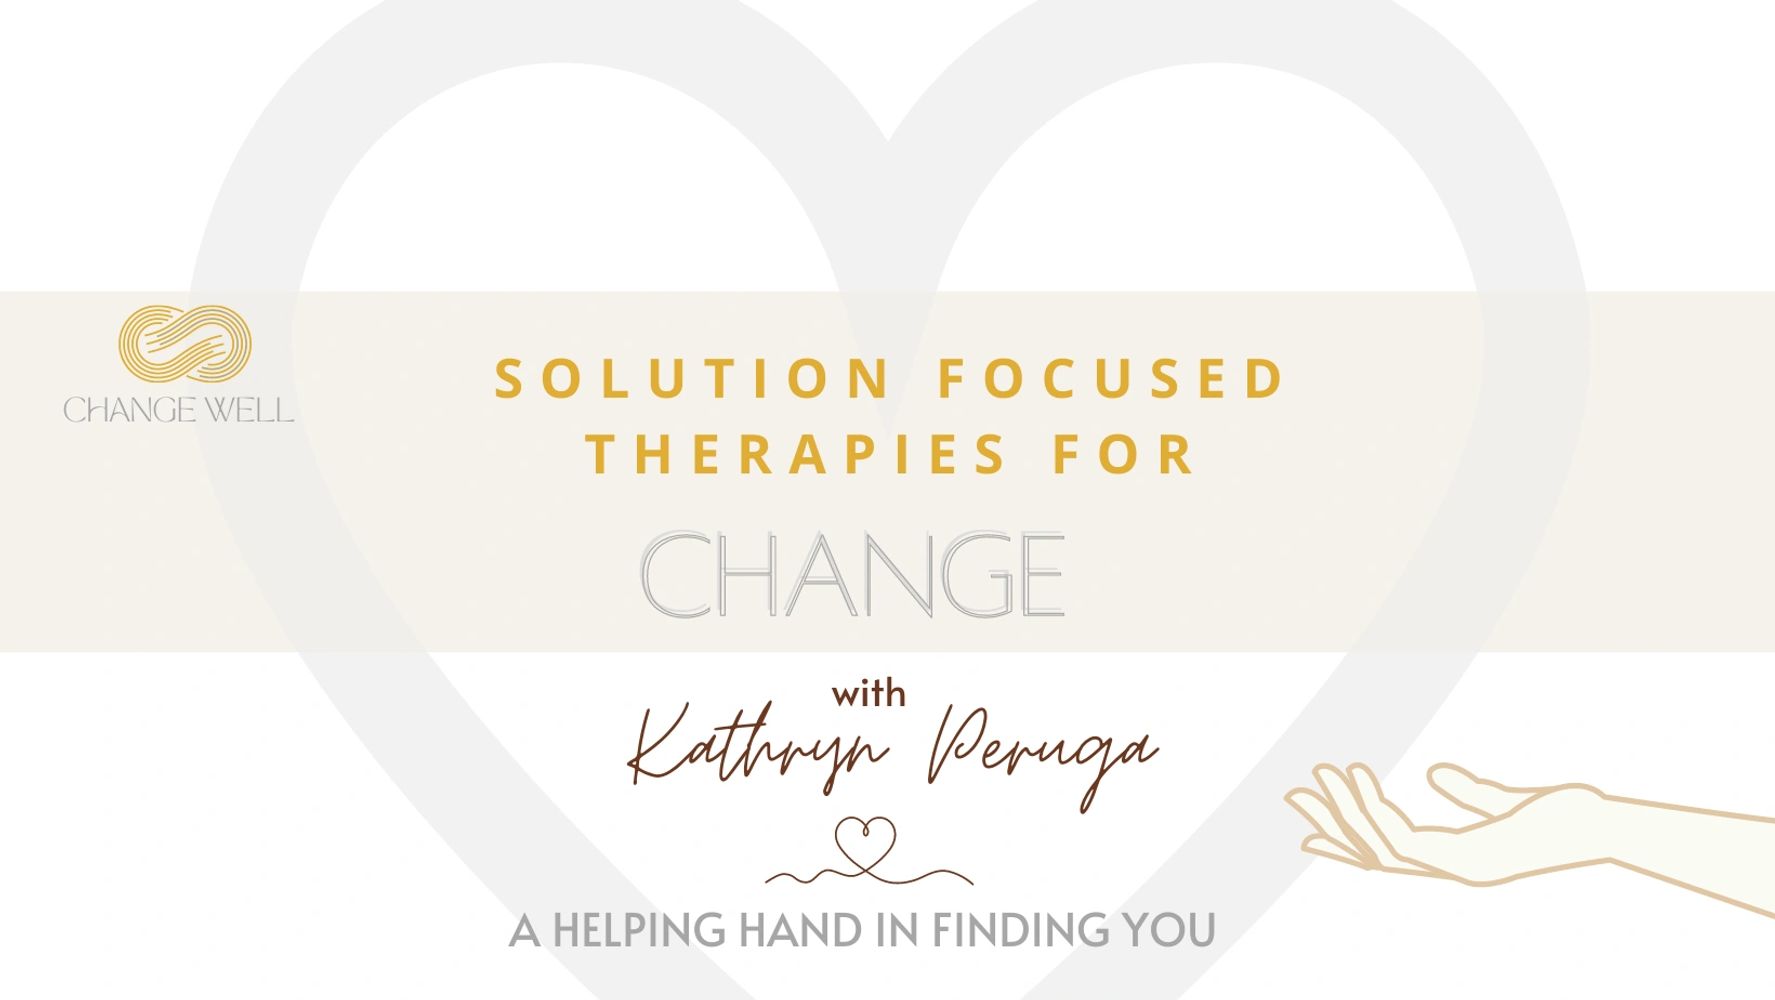 Promotional banner for a therapy based business